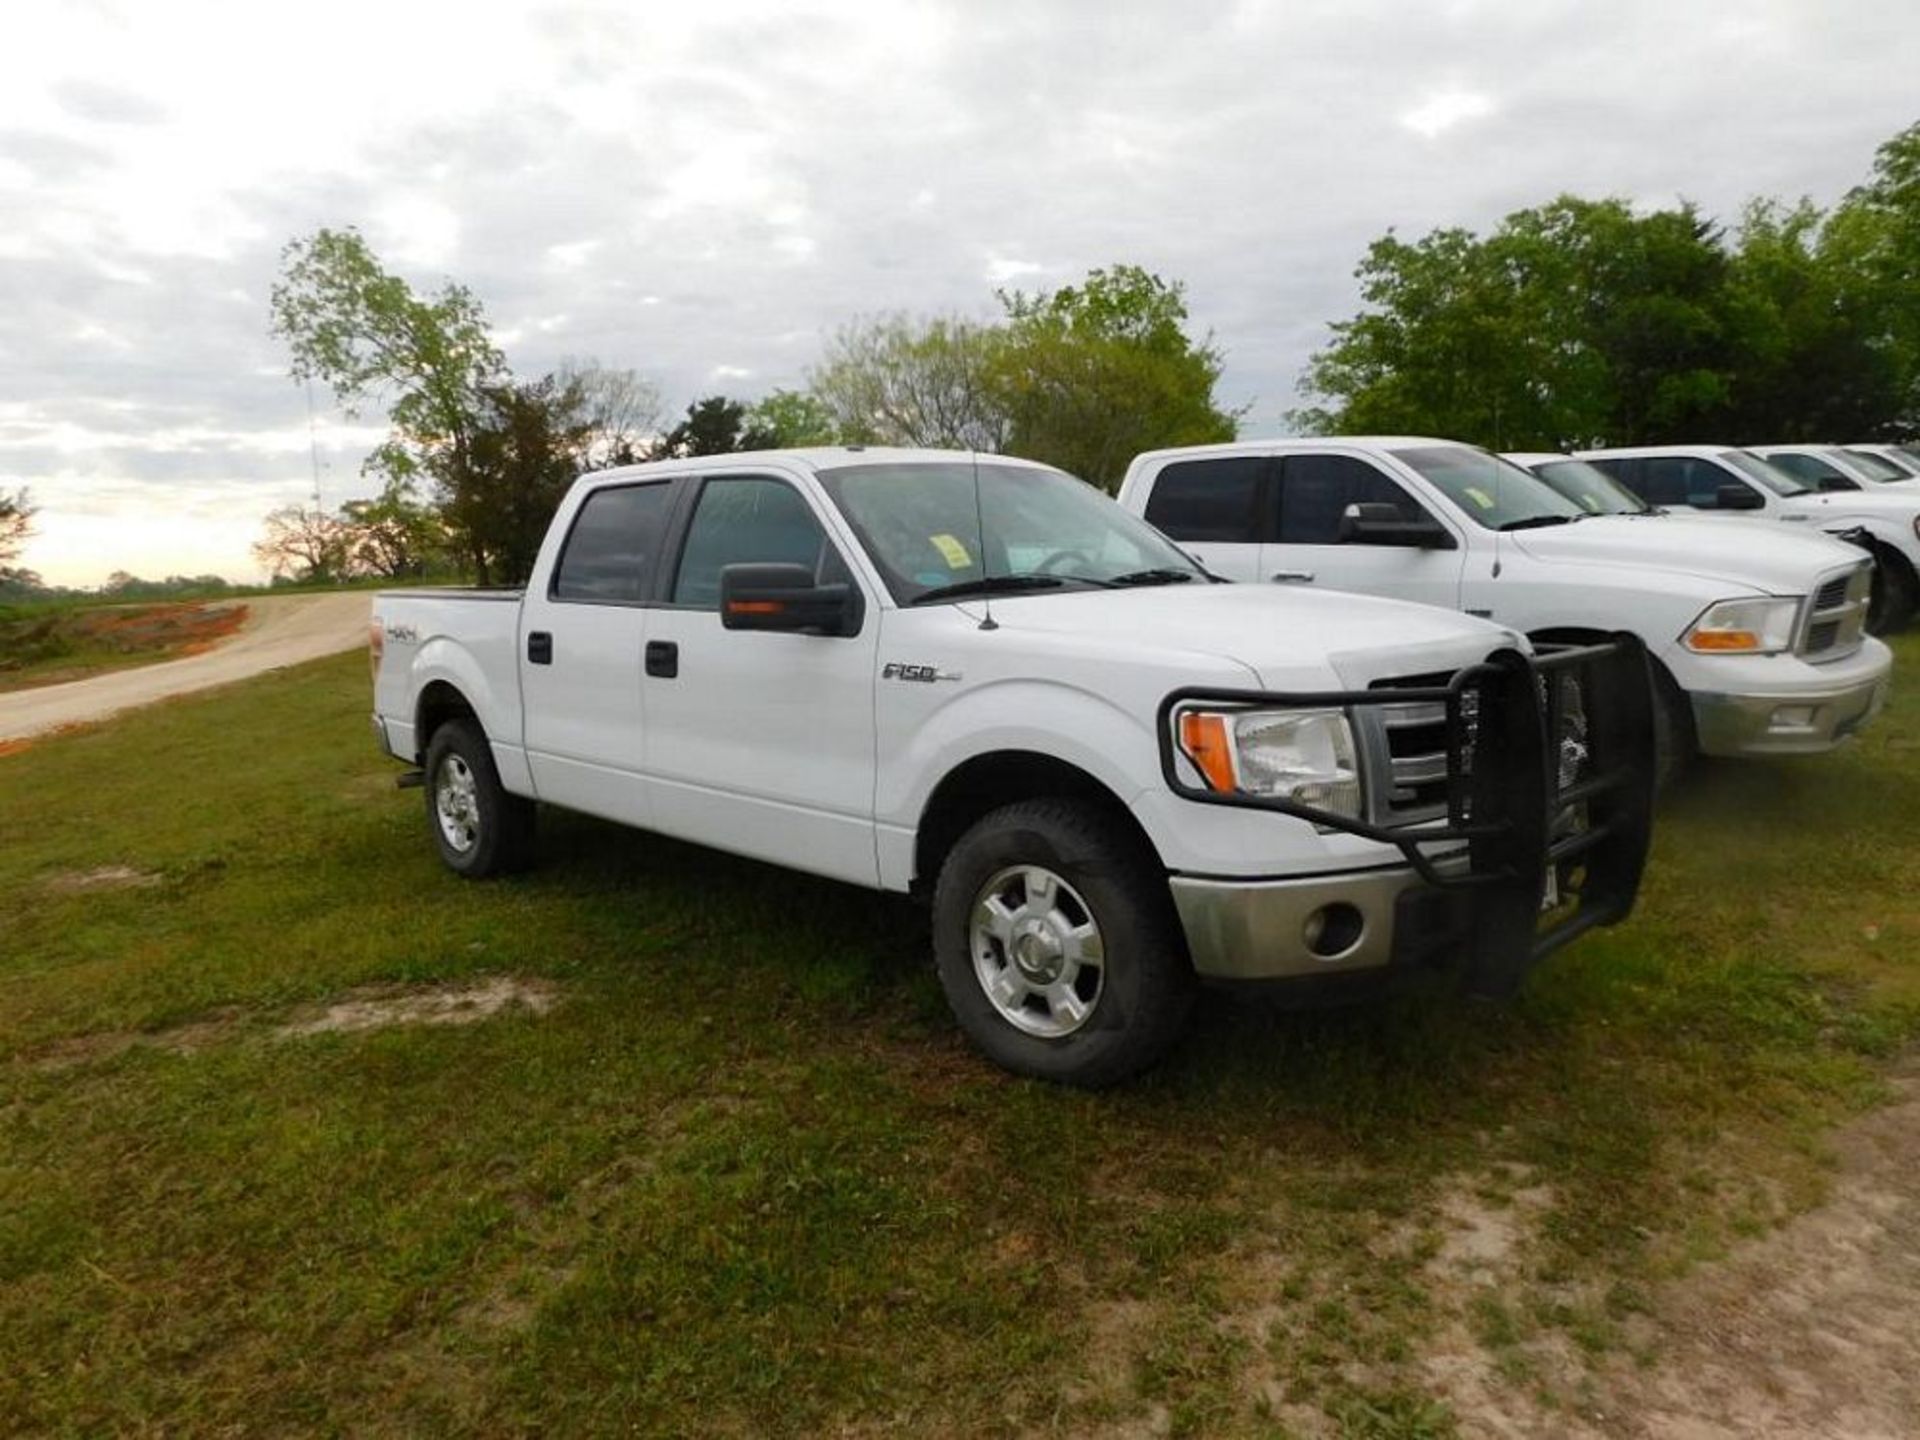 2013 Ford F-150 XLT 4x4 Crew Cab Pick-up Truck, VIN 1FTFW1EF4DFB20236, 5-1/2 ft. Bed, 5.0 Liter Gaso